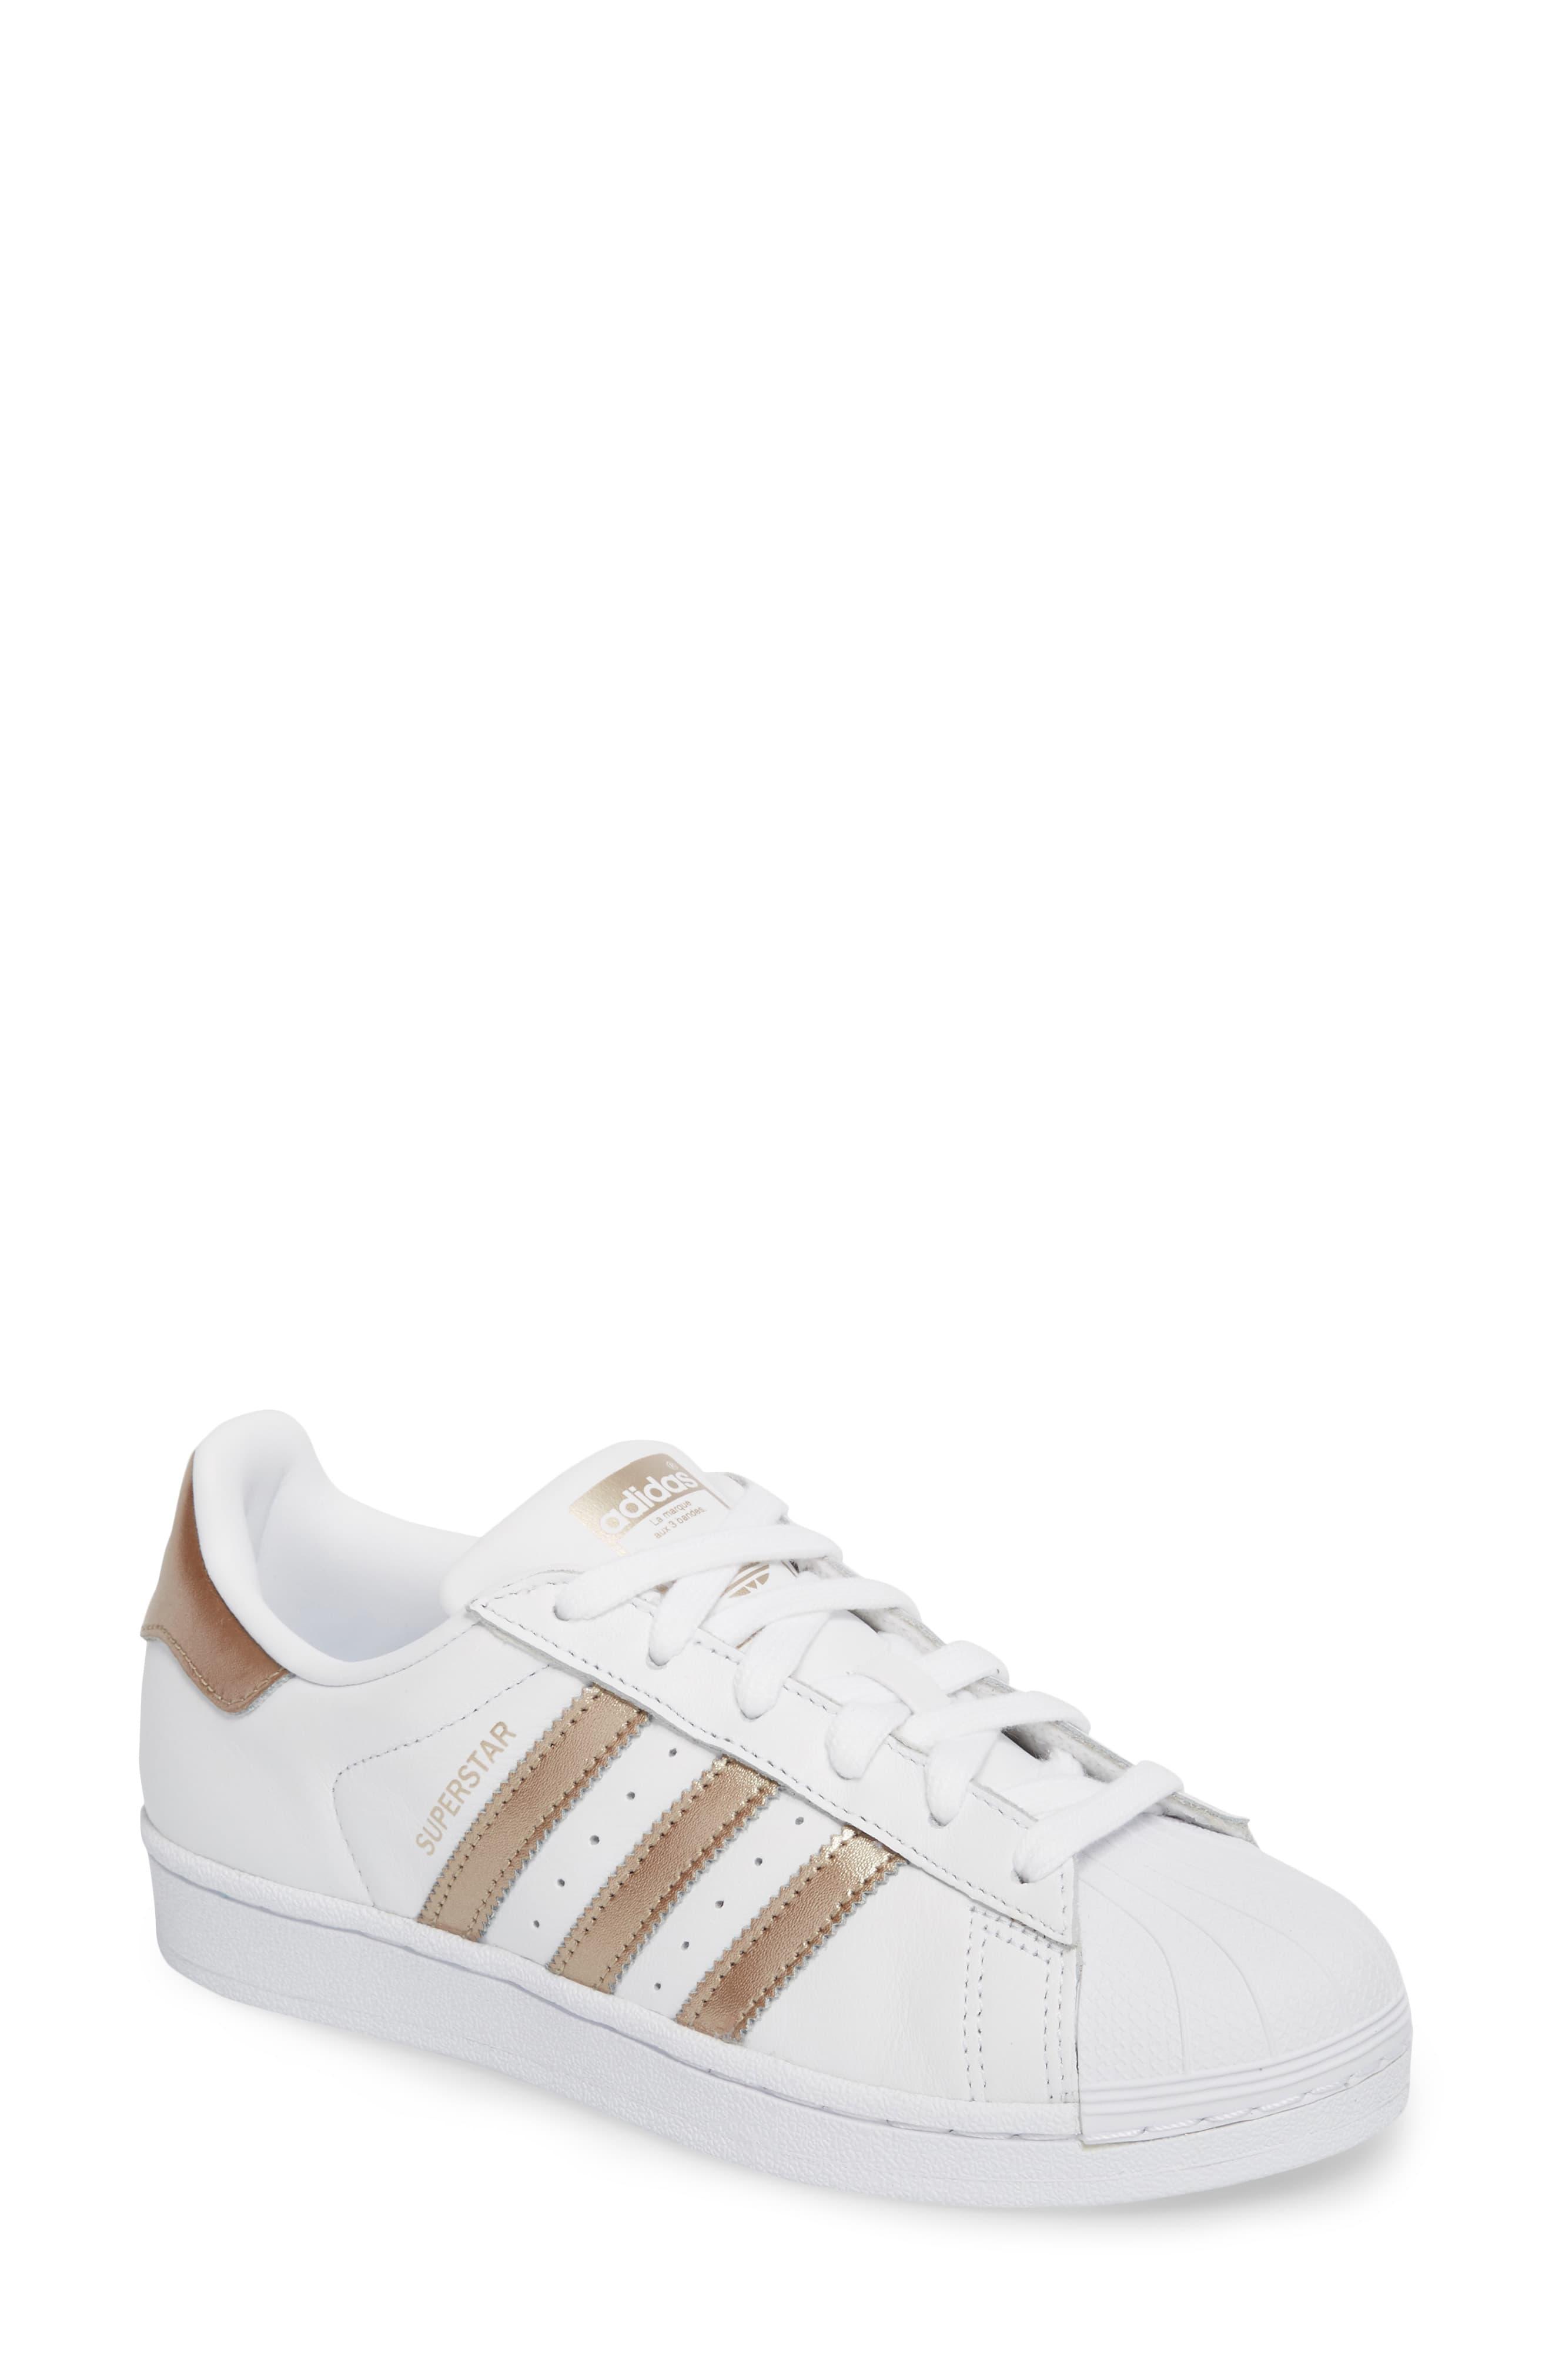 adidas white and silver superstar trainers